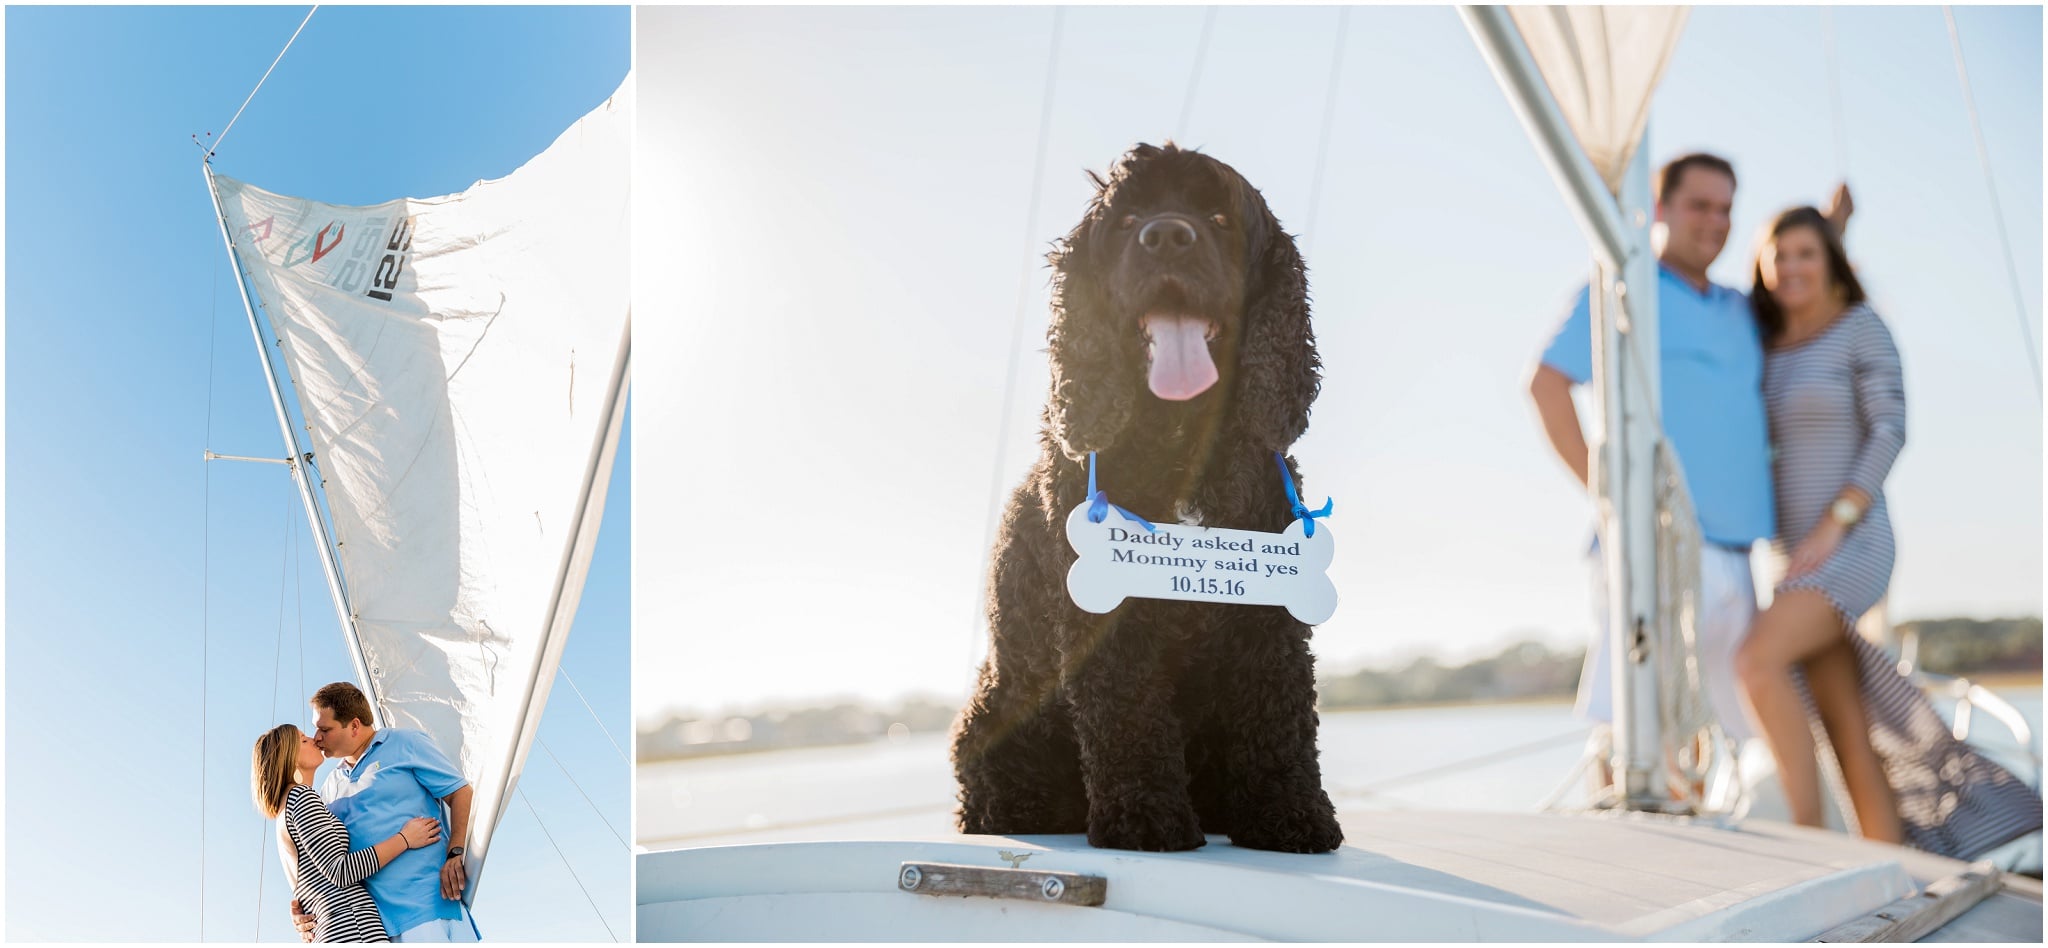 Save the date ideas, Dana and Bradley, Sailing with their dog who is holding a save the date sign, Myrtle Beach Engagement Photography Session 10, Murrells Inlet, South Carolina, www.onelifephoto.net Photography